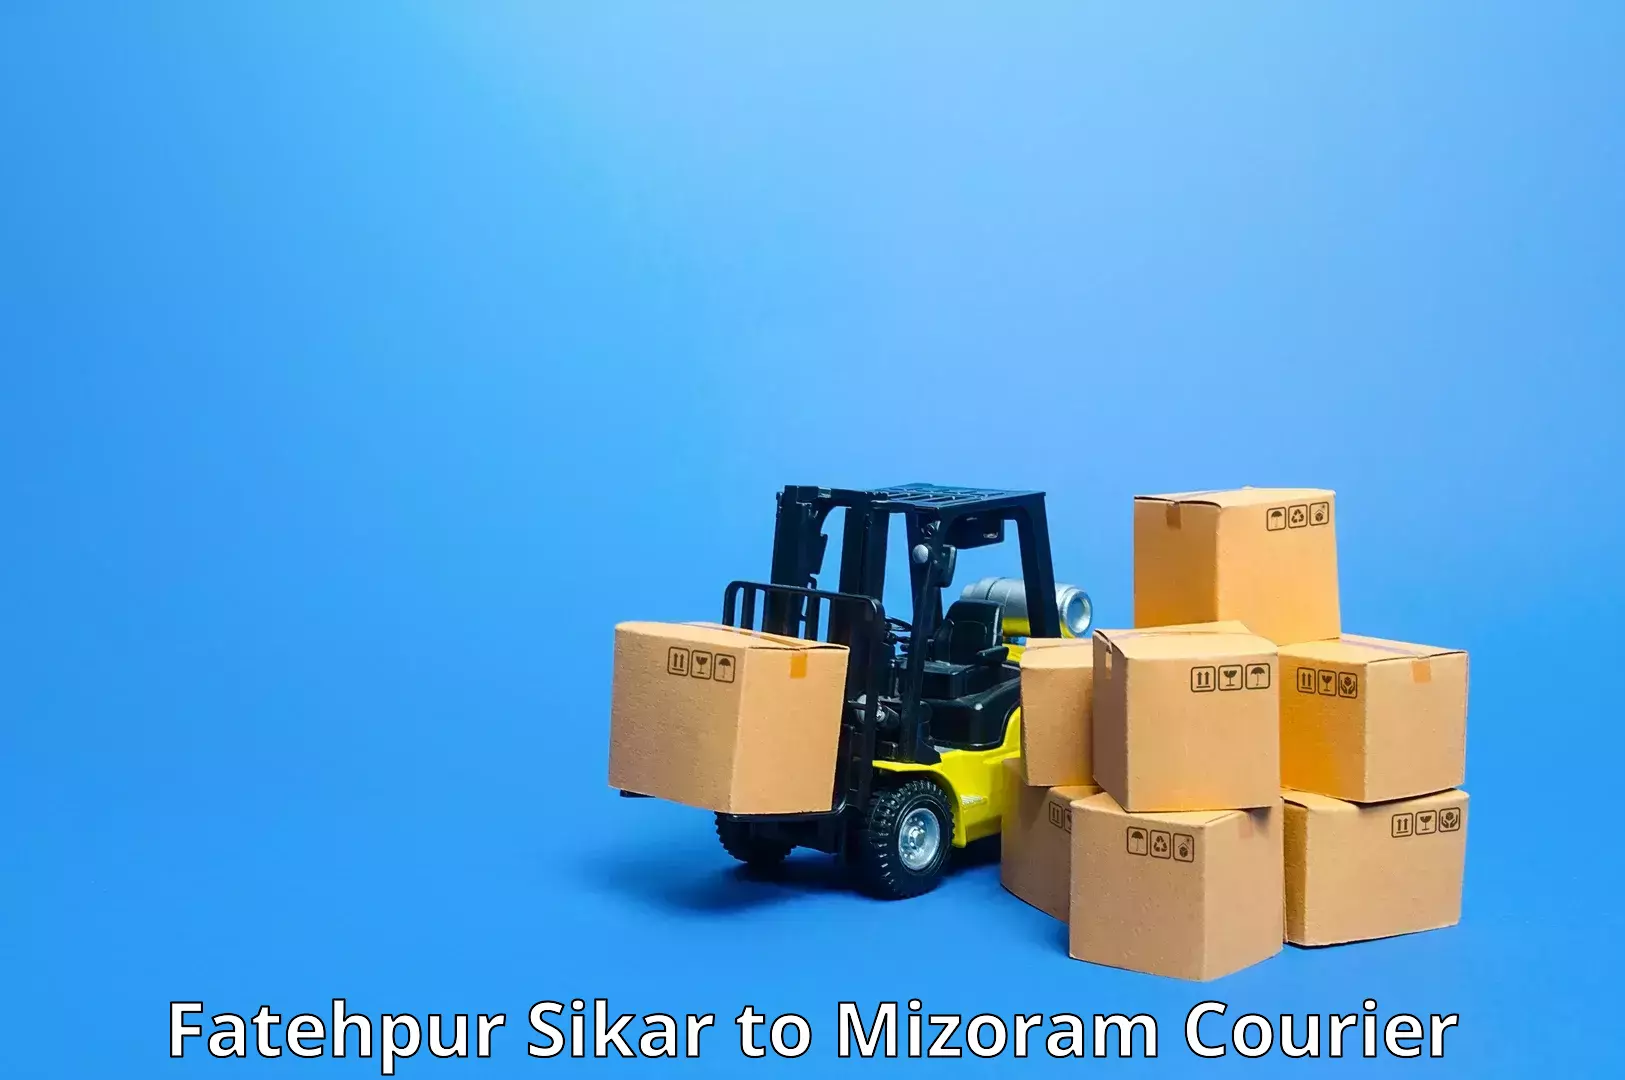 Multi-national courier services Fatehpur Sikar to Siaha